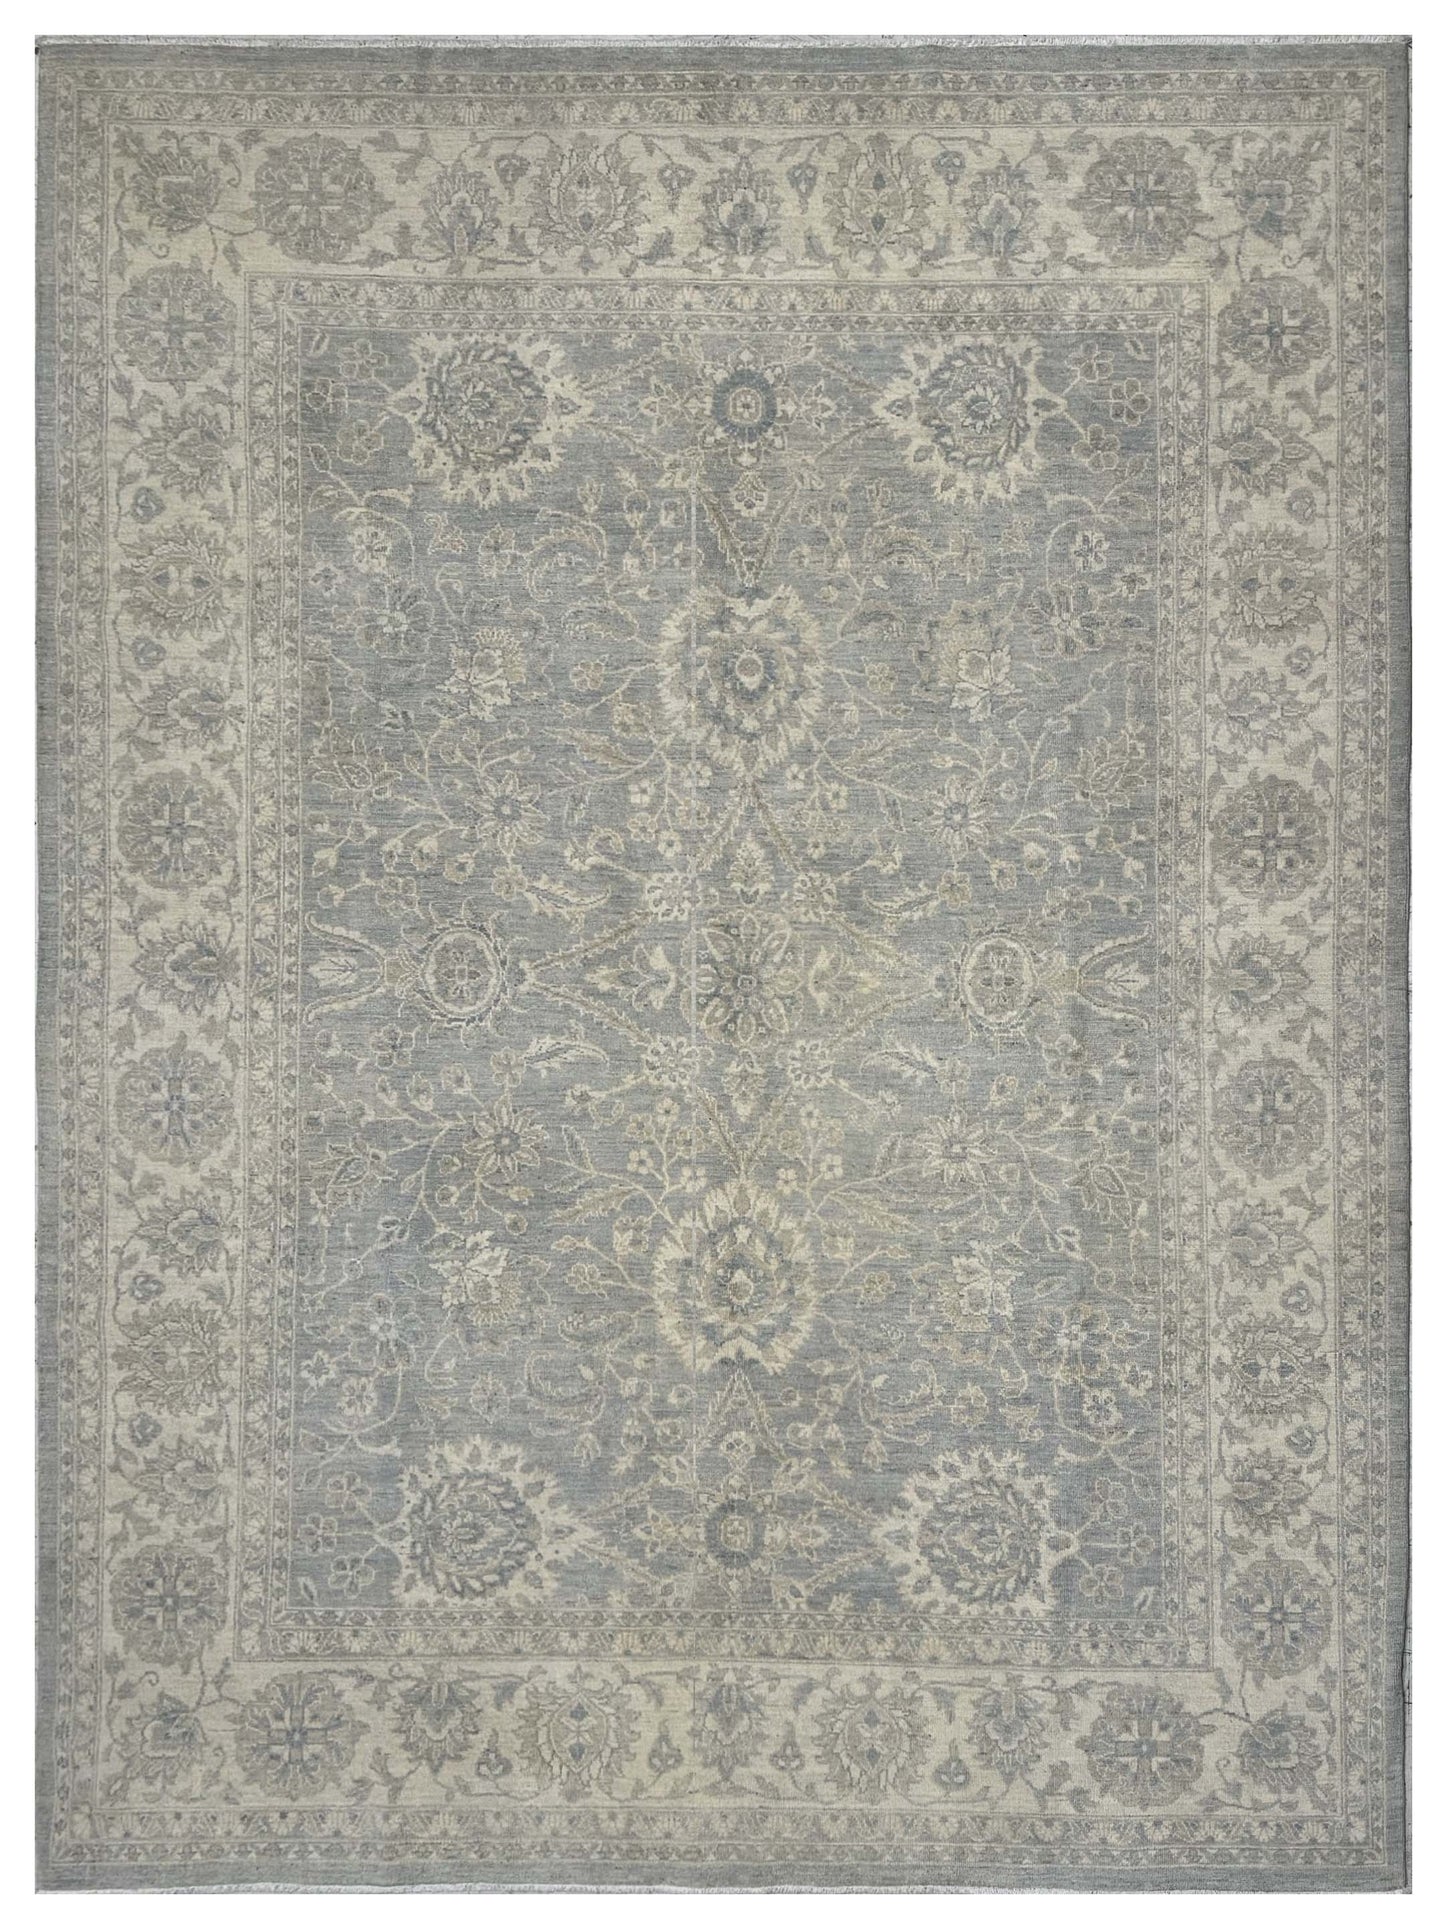 Artisan Patricia 318226 Lt.Blue Traditional Knotted Rug